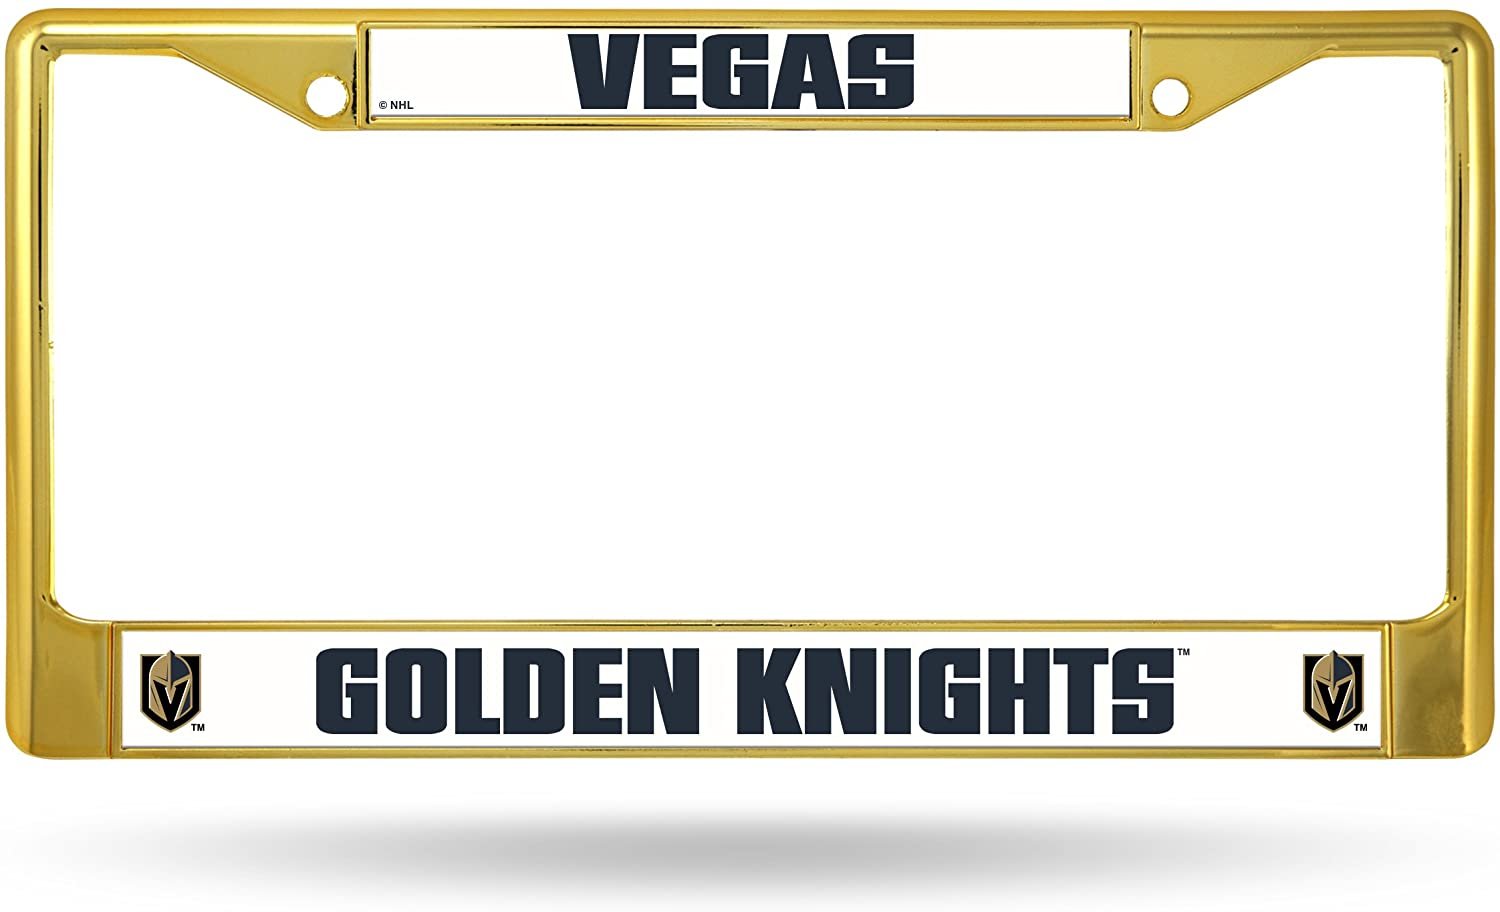 Vegas Golden Knights Premium Gold Color Metal License Plate Frame Tag Cover, 12x6 Inch